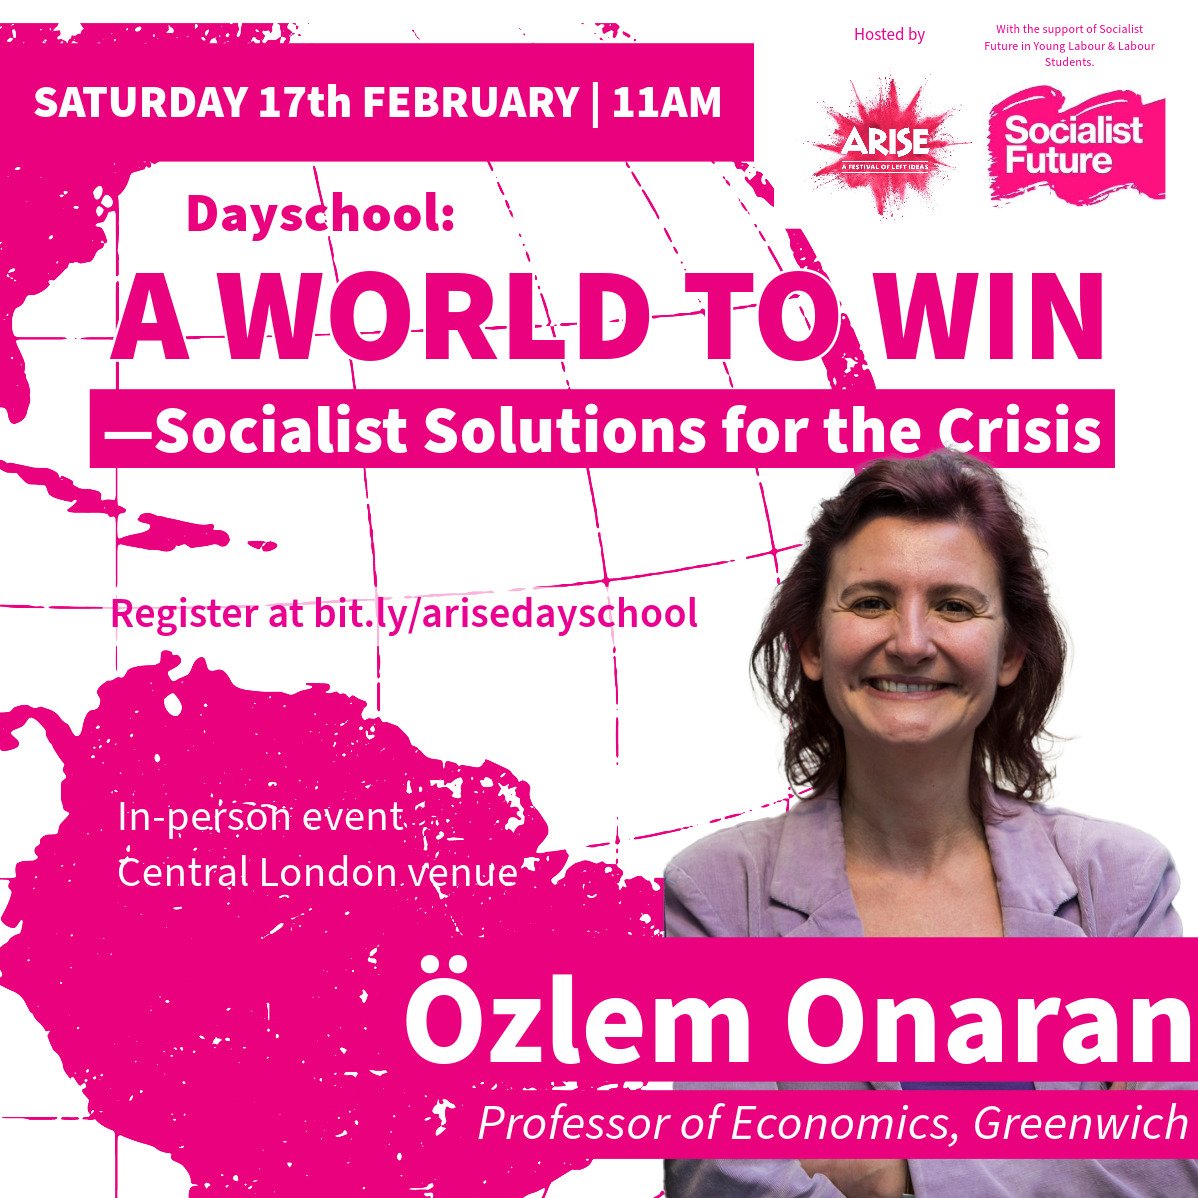 Professor of Economics at the University of Greenwich Özlem Onaran offers excellent analysis of how austerity has failed millions, and strong alternative proposals- hear from her as part of this London dayschool hosted by the @Arise_Festival team next Feb: bit.ly/arisedayschool